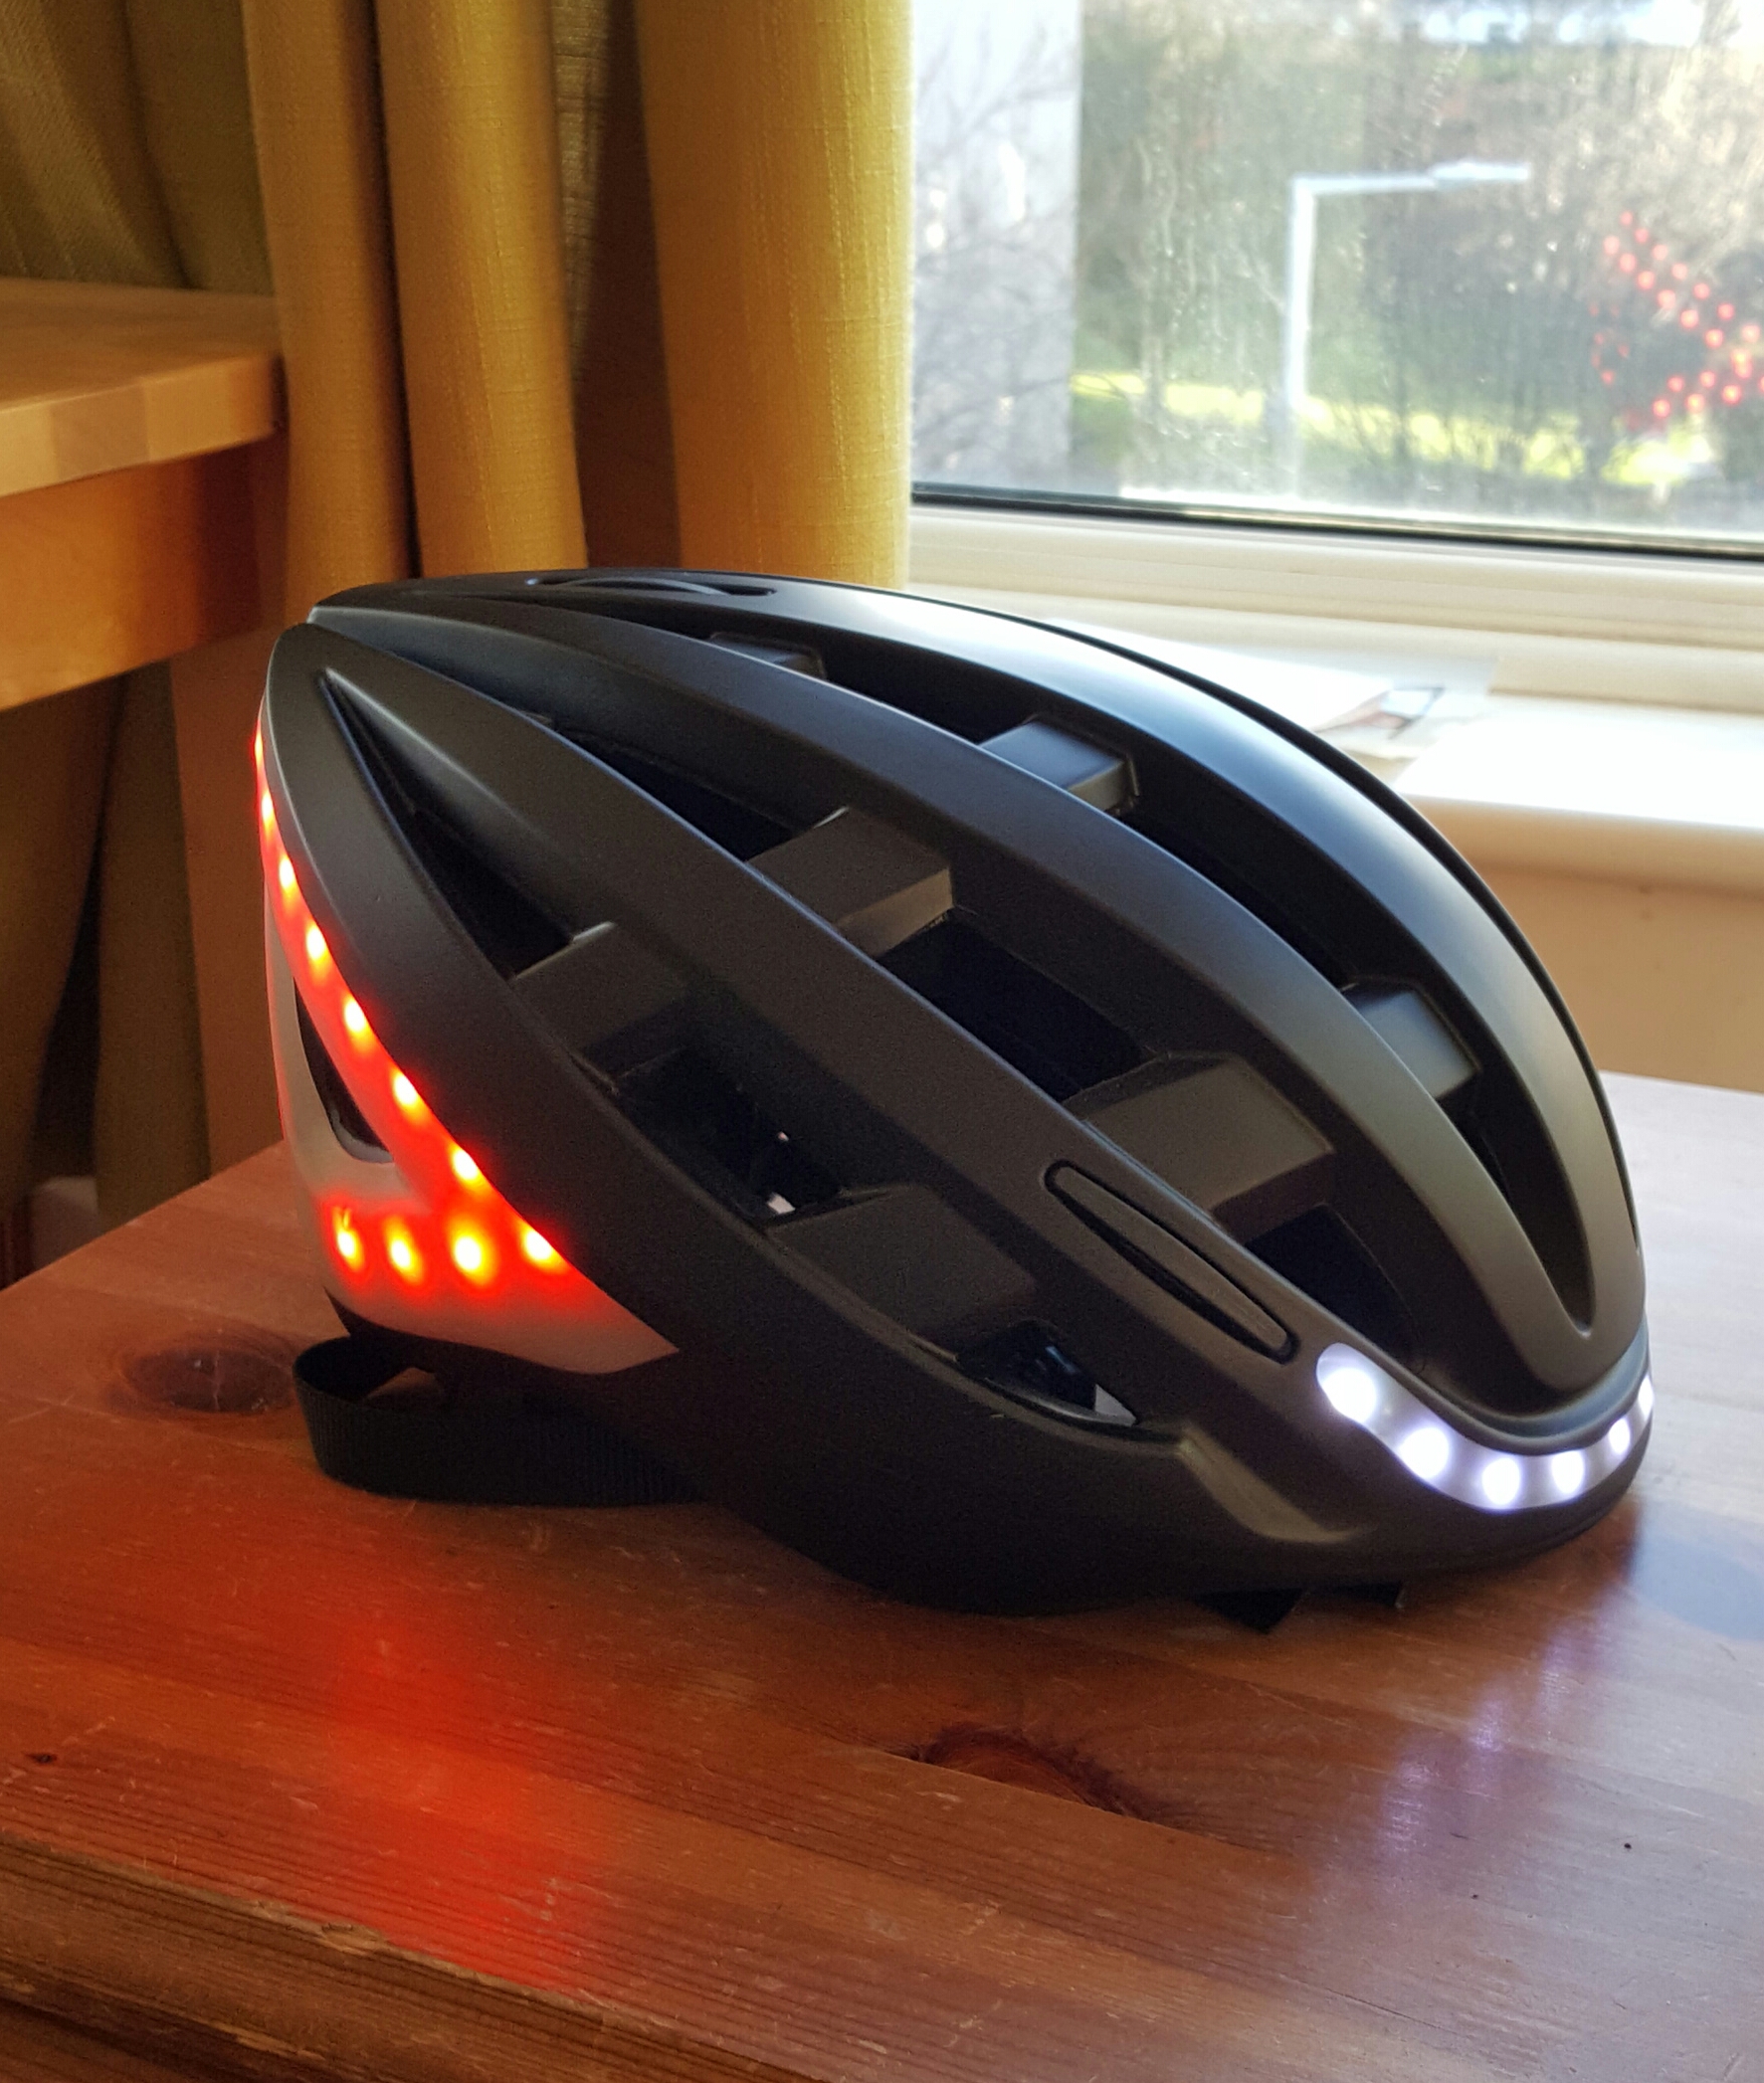 REVIEWING THE LUMOS NEW GENERATION CYCLE HELMET, IDEAL FOR THE URBAN CYCLIST.